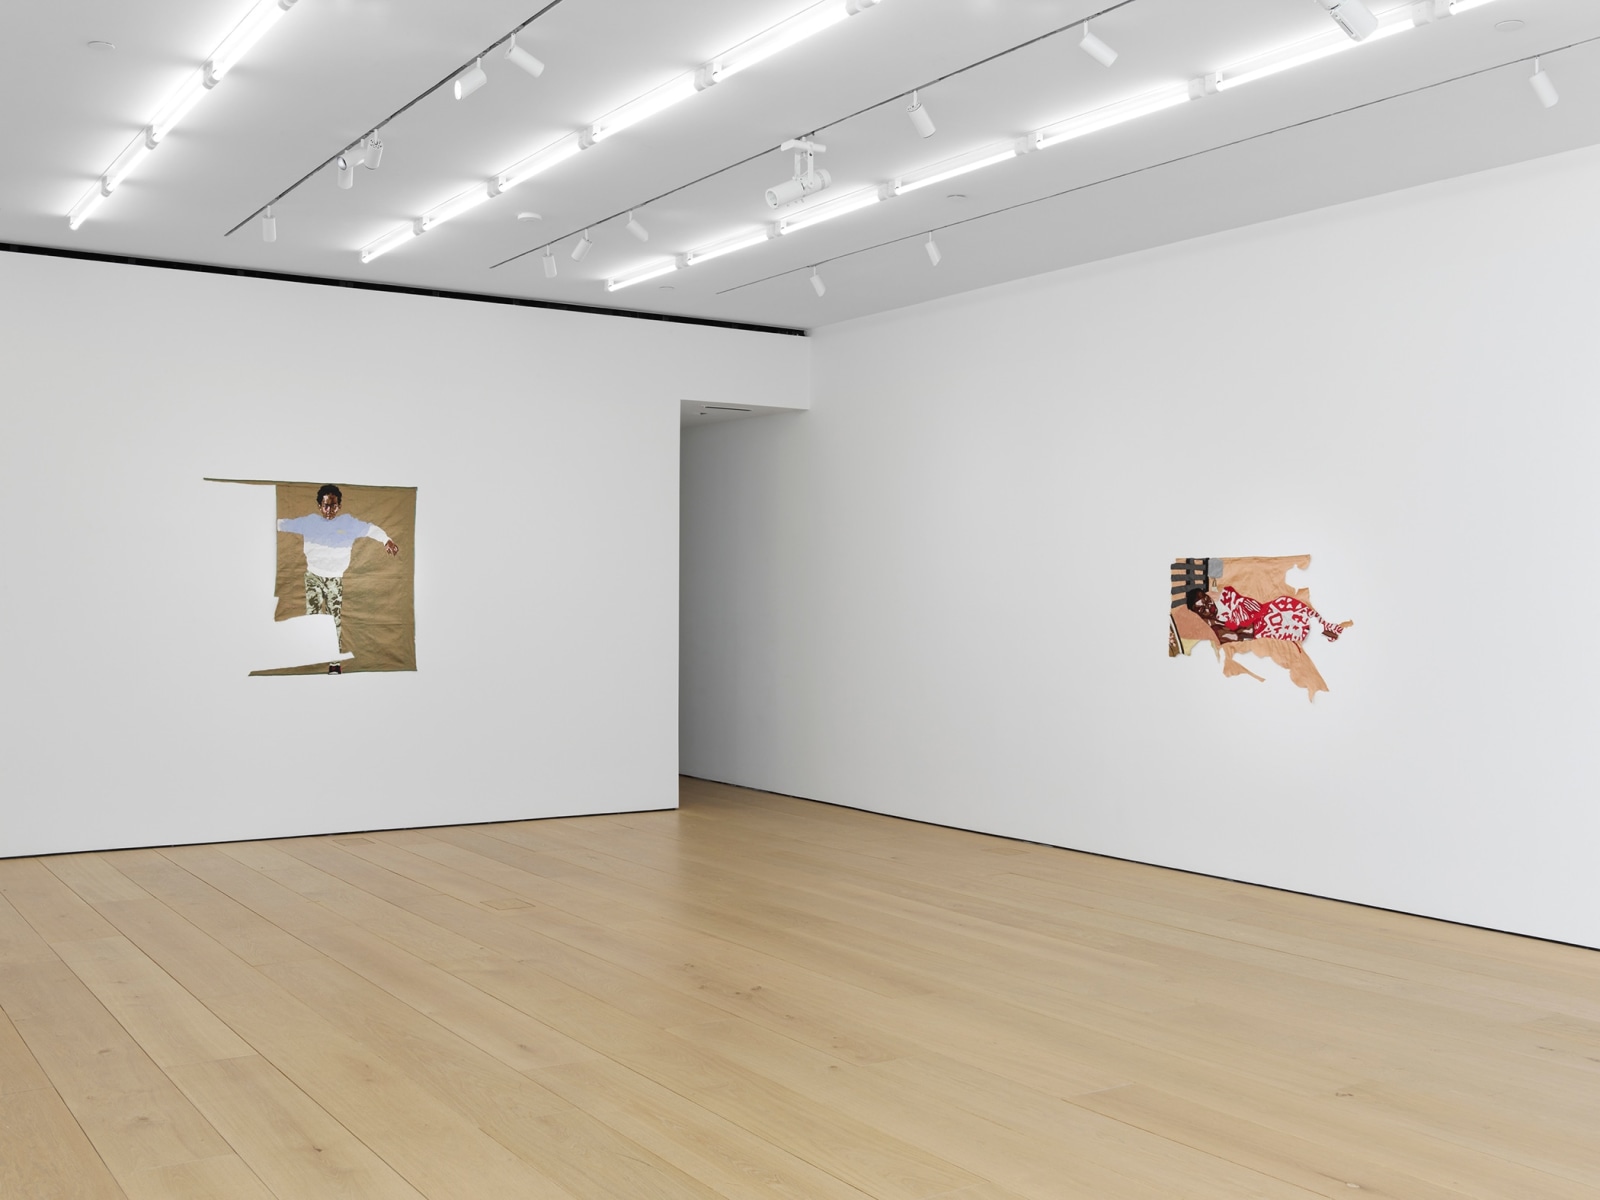 Fourth installation view of the exhibition Billie Zangewa: Wings of Change at Lehmann Maupin in New York